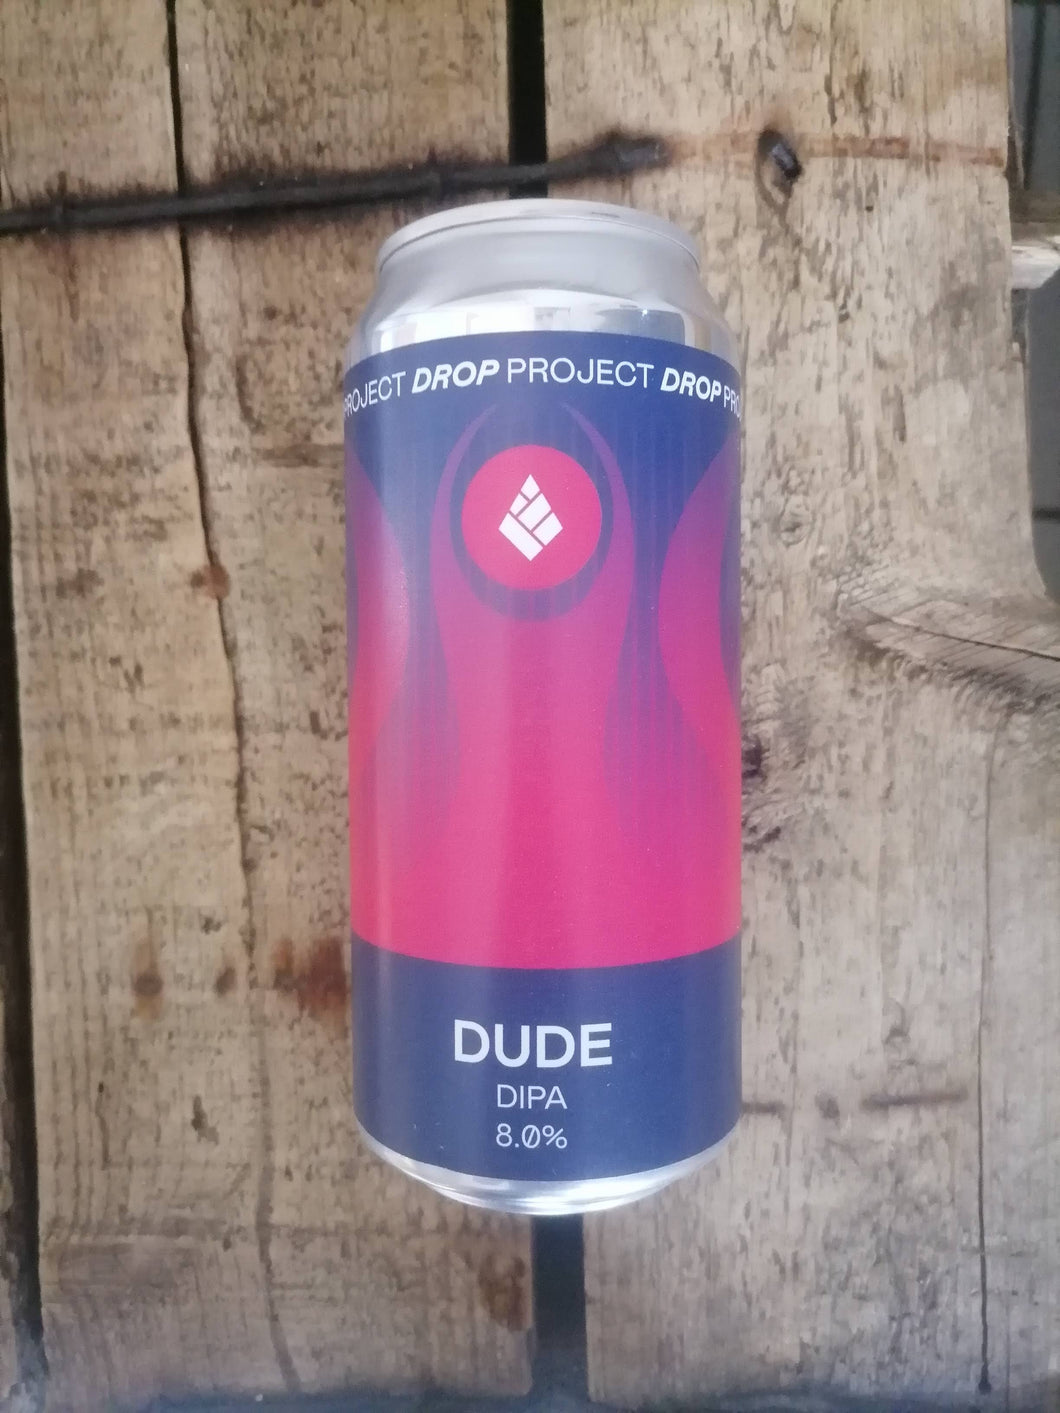 Drop Project Dude 8% (440ml can)